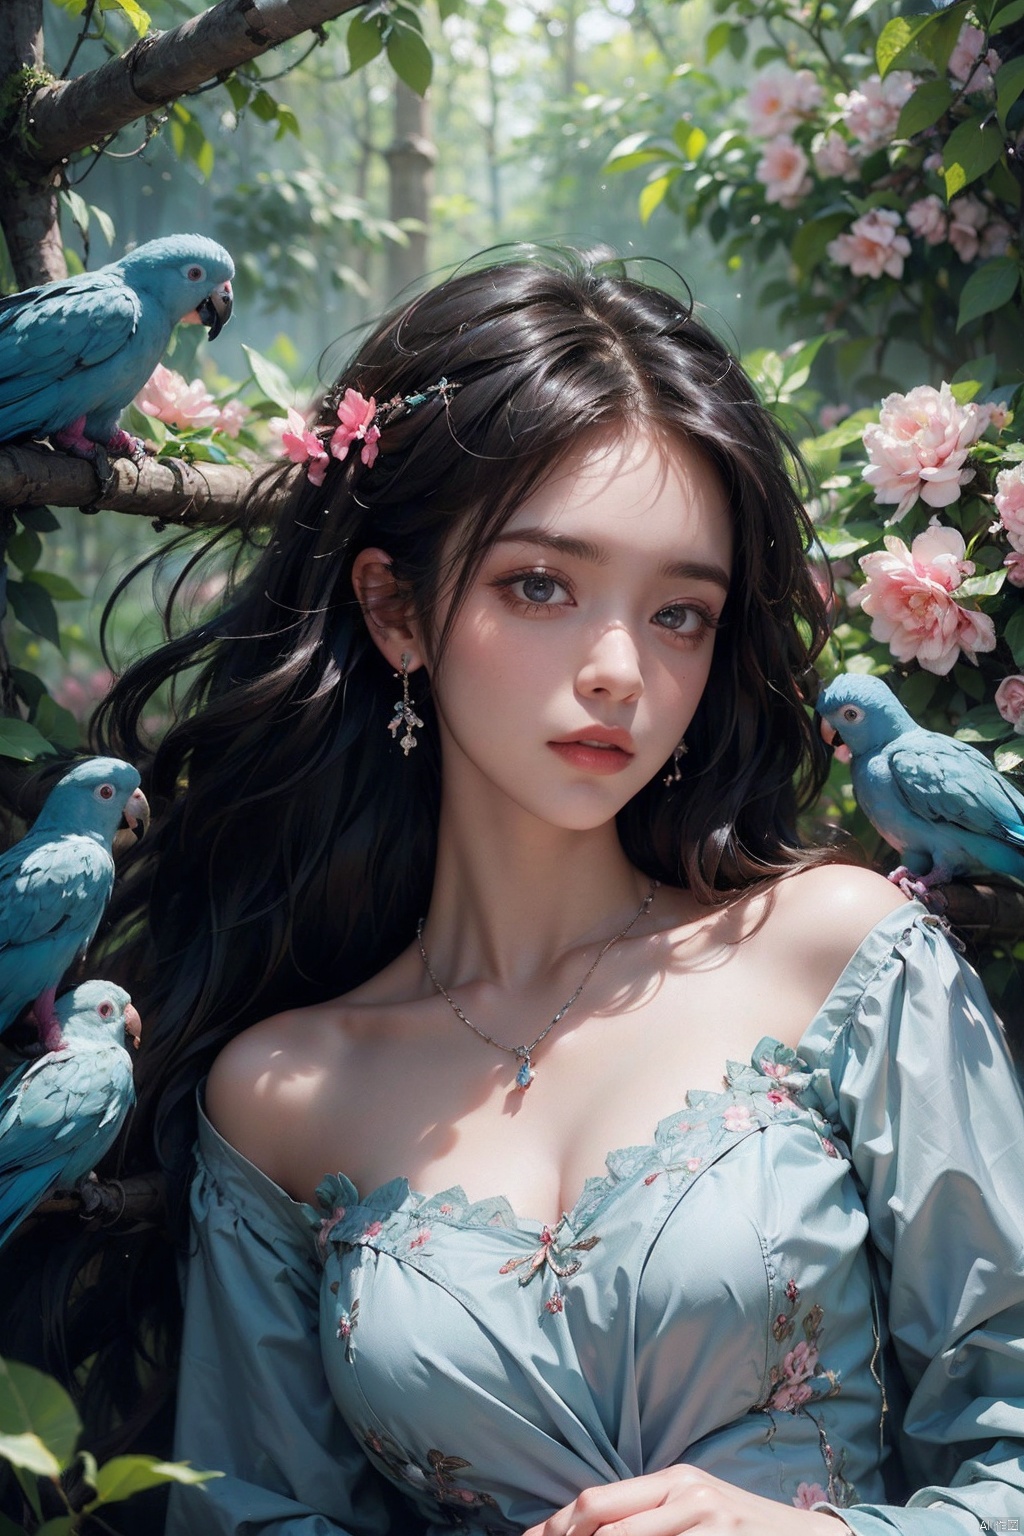 (Masterpiece, best quality, high-resolution: 1.2), (upper body), surrealist photography, 1 girl, light blue dress. Solo, (Pink Parrot), Bird, Necklace, Black Curly Hair, Flowing Hair, Flowers, Forest Background, Many Birds Sleeping Together, Depth of Field, Watching the Audience, Female Focus, Retro, Realistic Characters, Best Quality, Film

